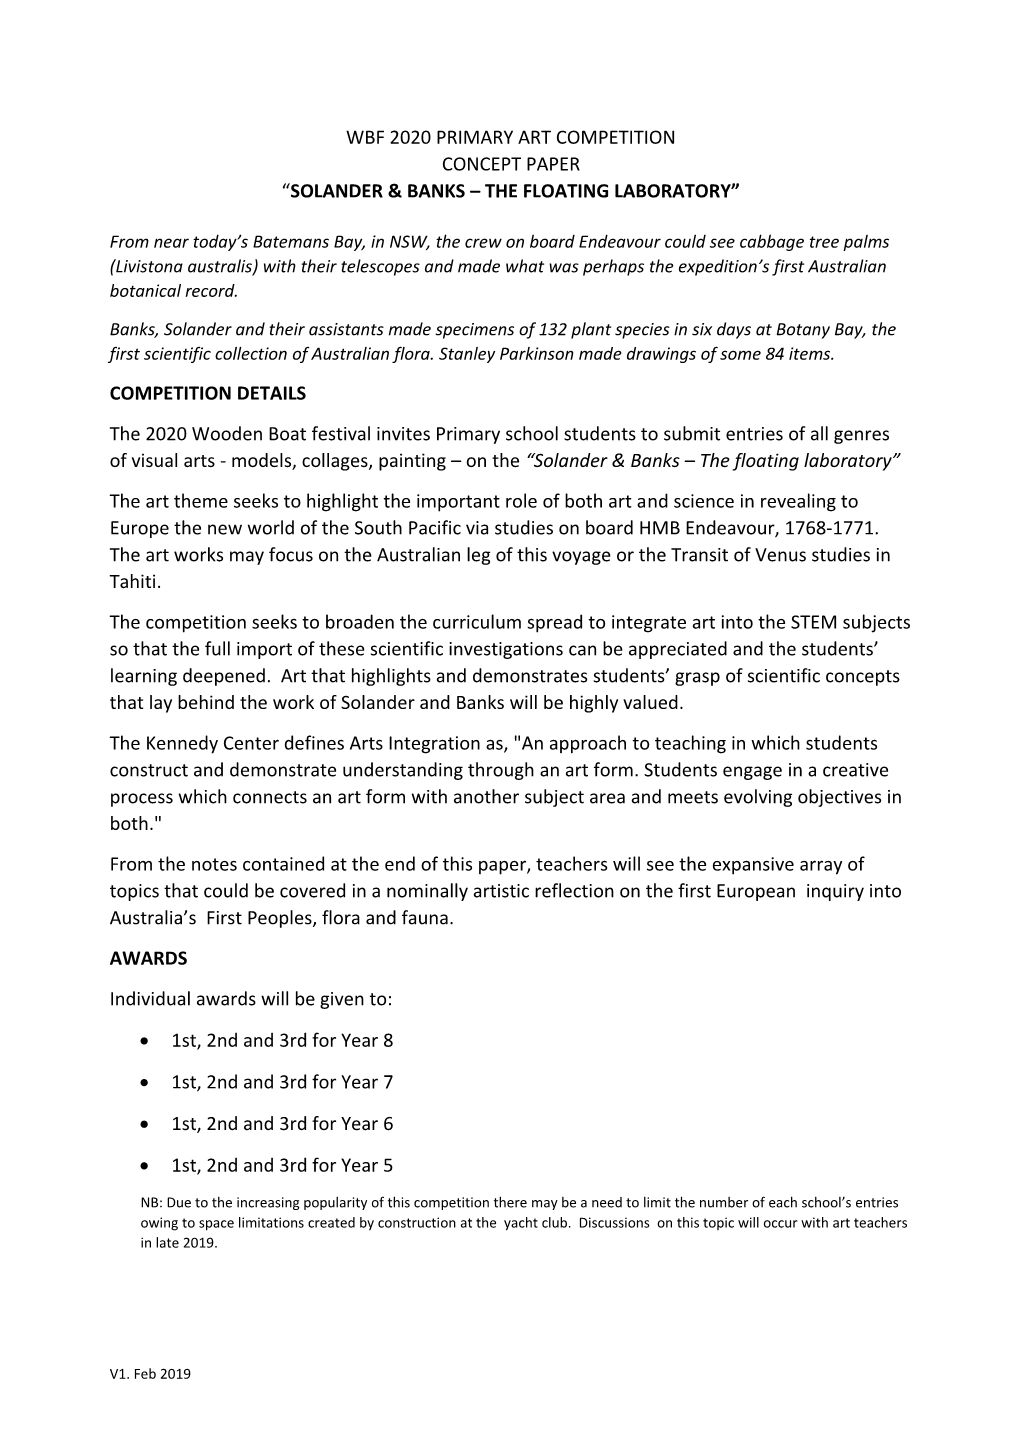 Wbf 2020 Primary Art Competition Concept Paper “Solander & Banks